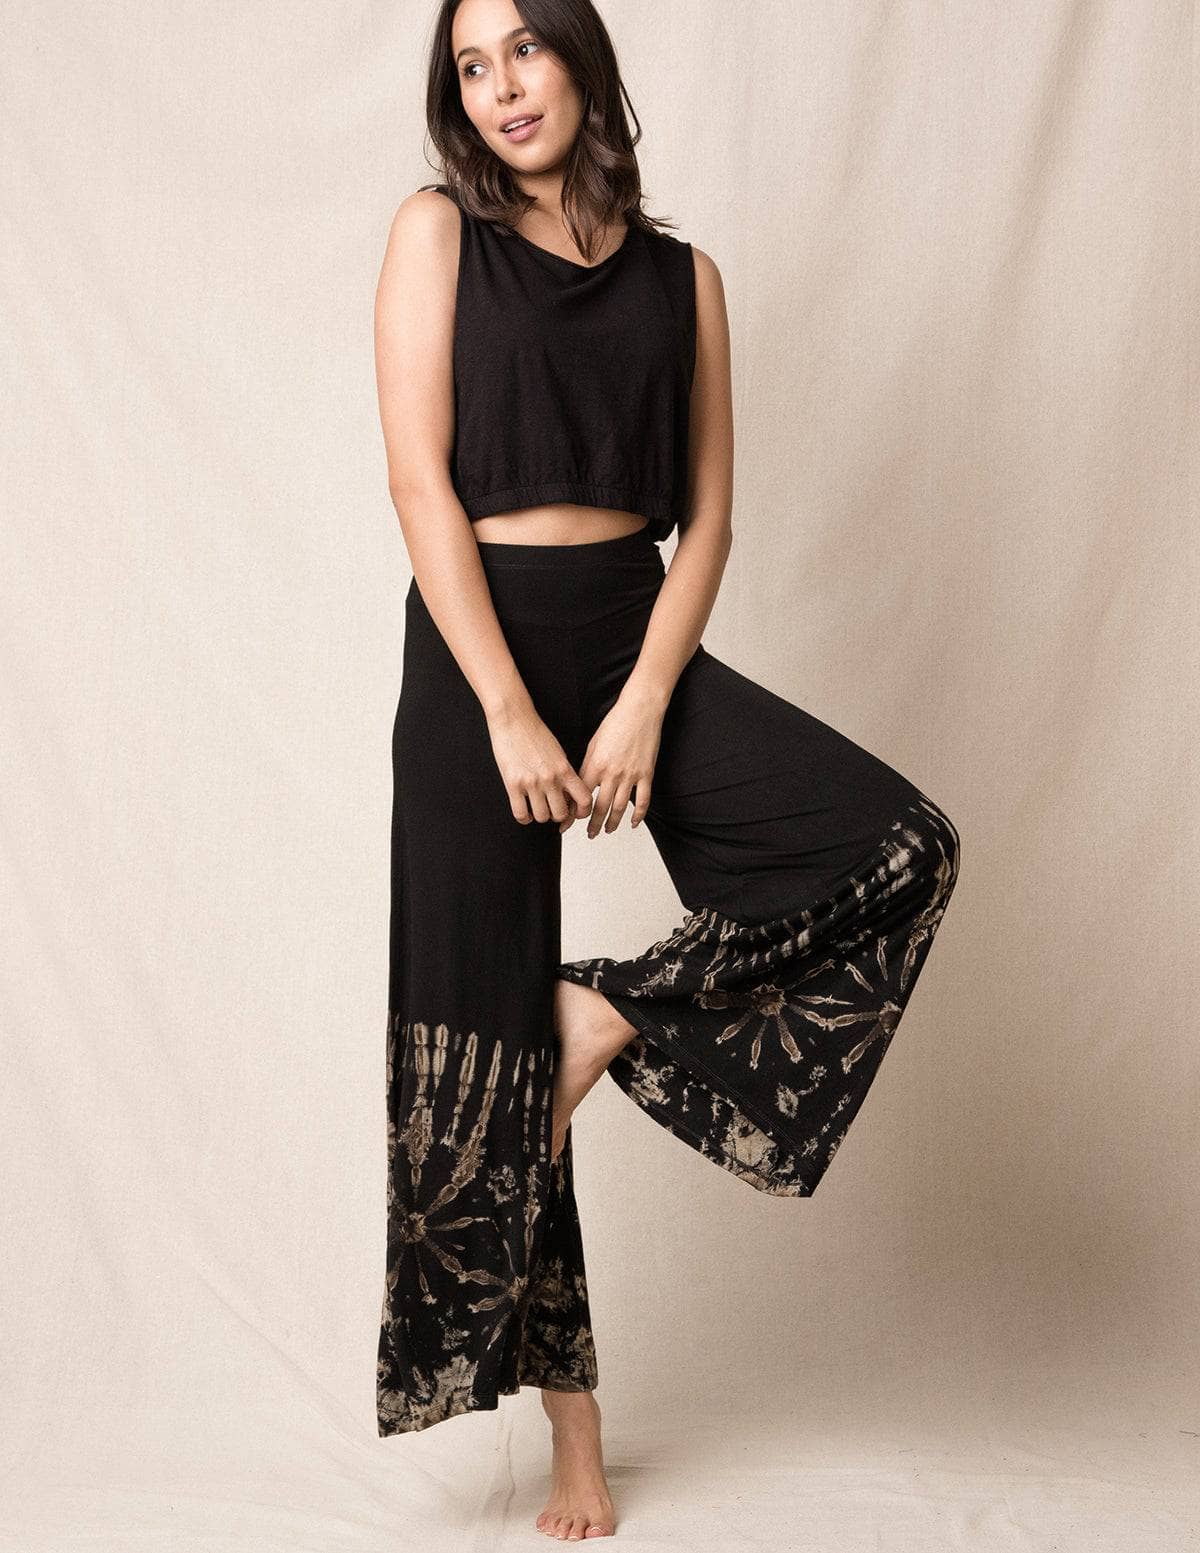 Buy Black Solid Palazzos Online - W for Woman